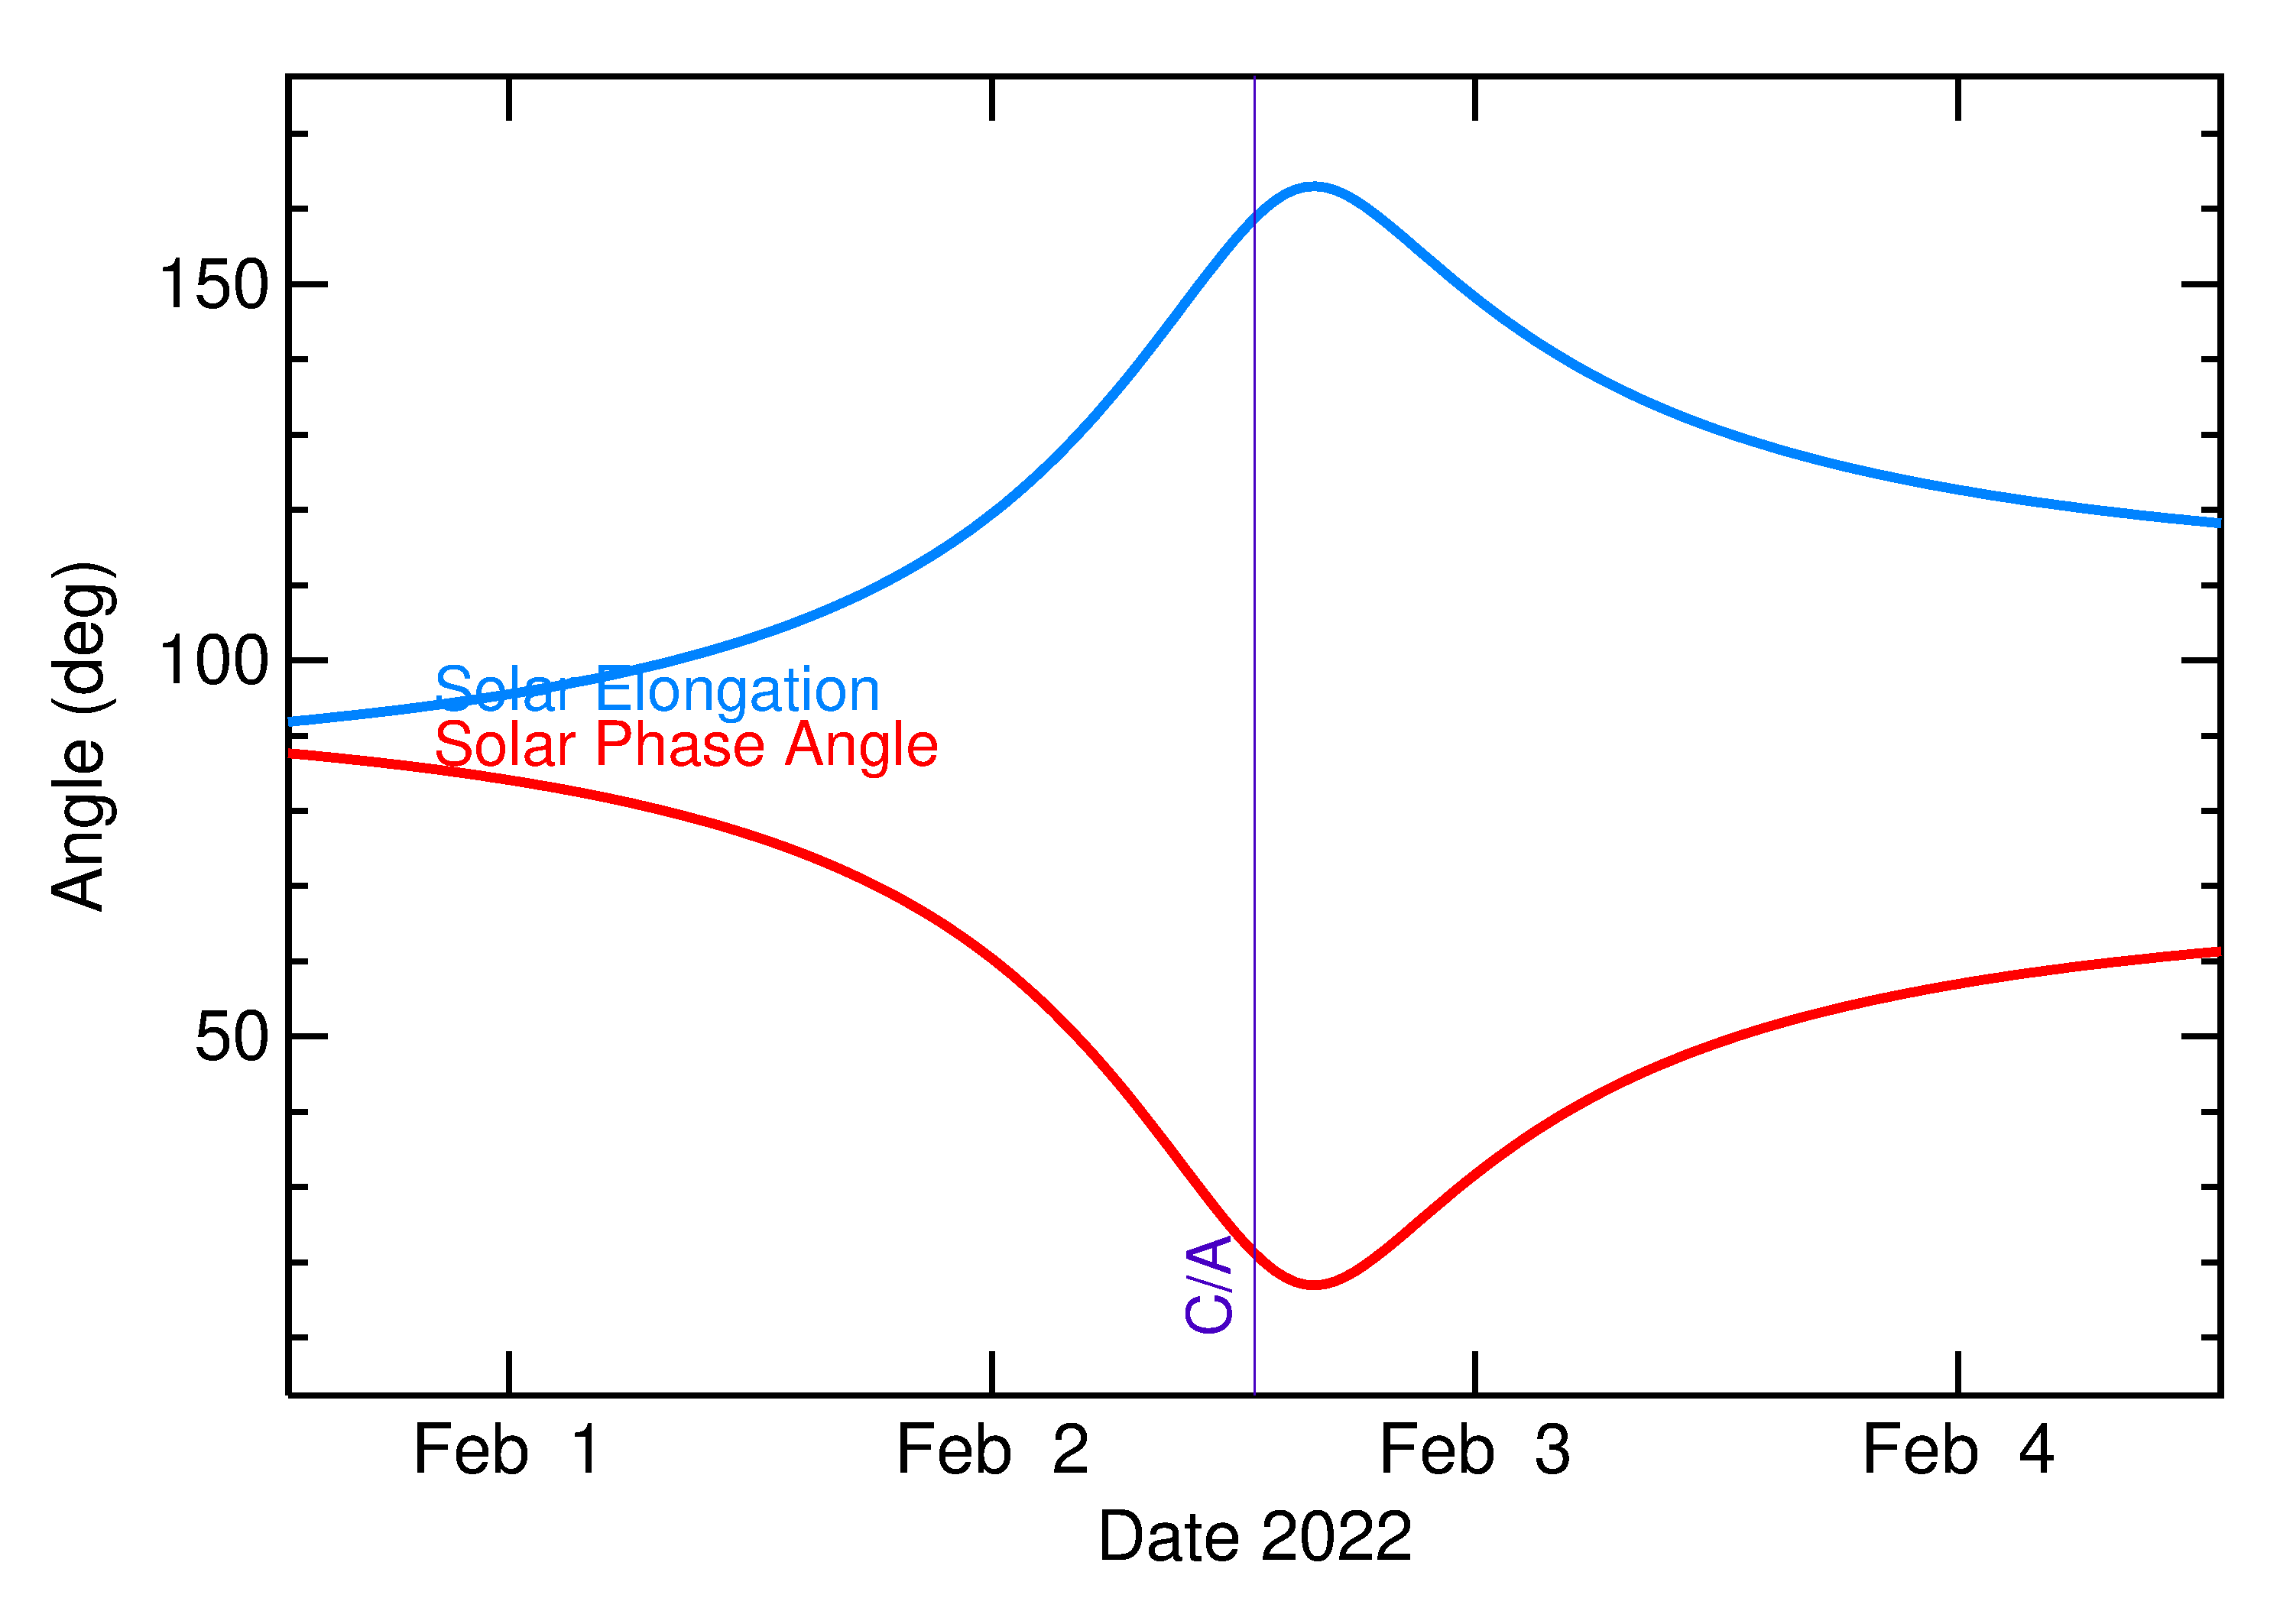 Solar Elongation and Solar Phase Angle of 2022 CG in the days around closest approach